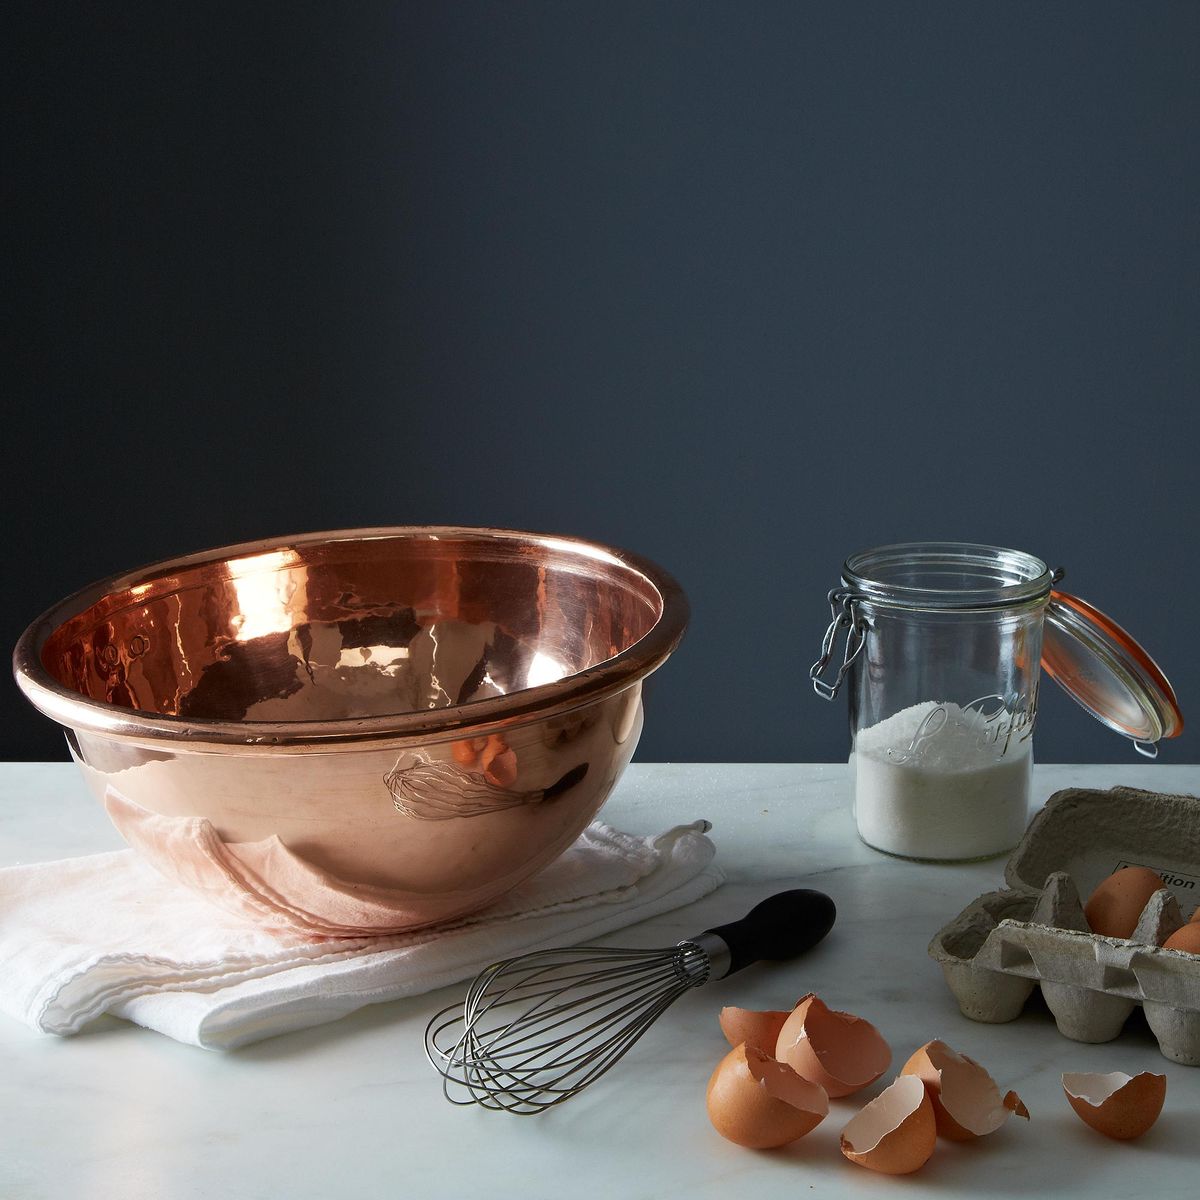 The Ultimate Kitchen Tool: A Hand-Forged Copper Pan